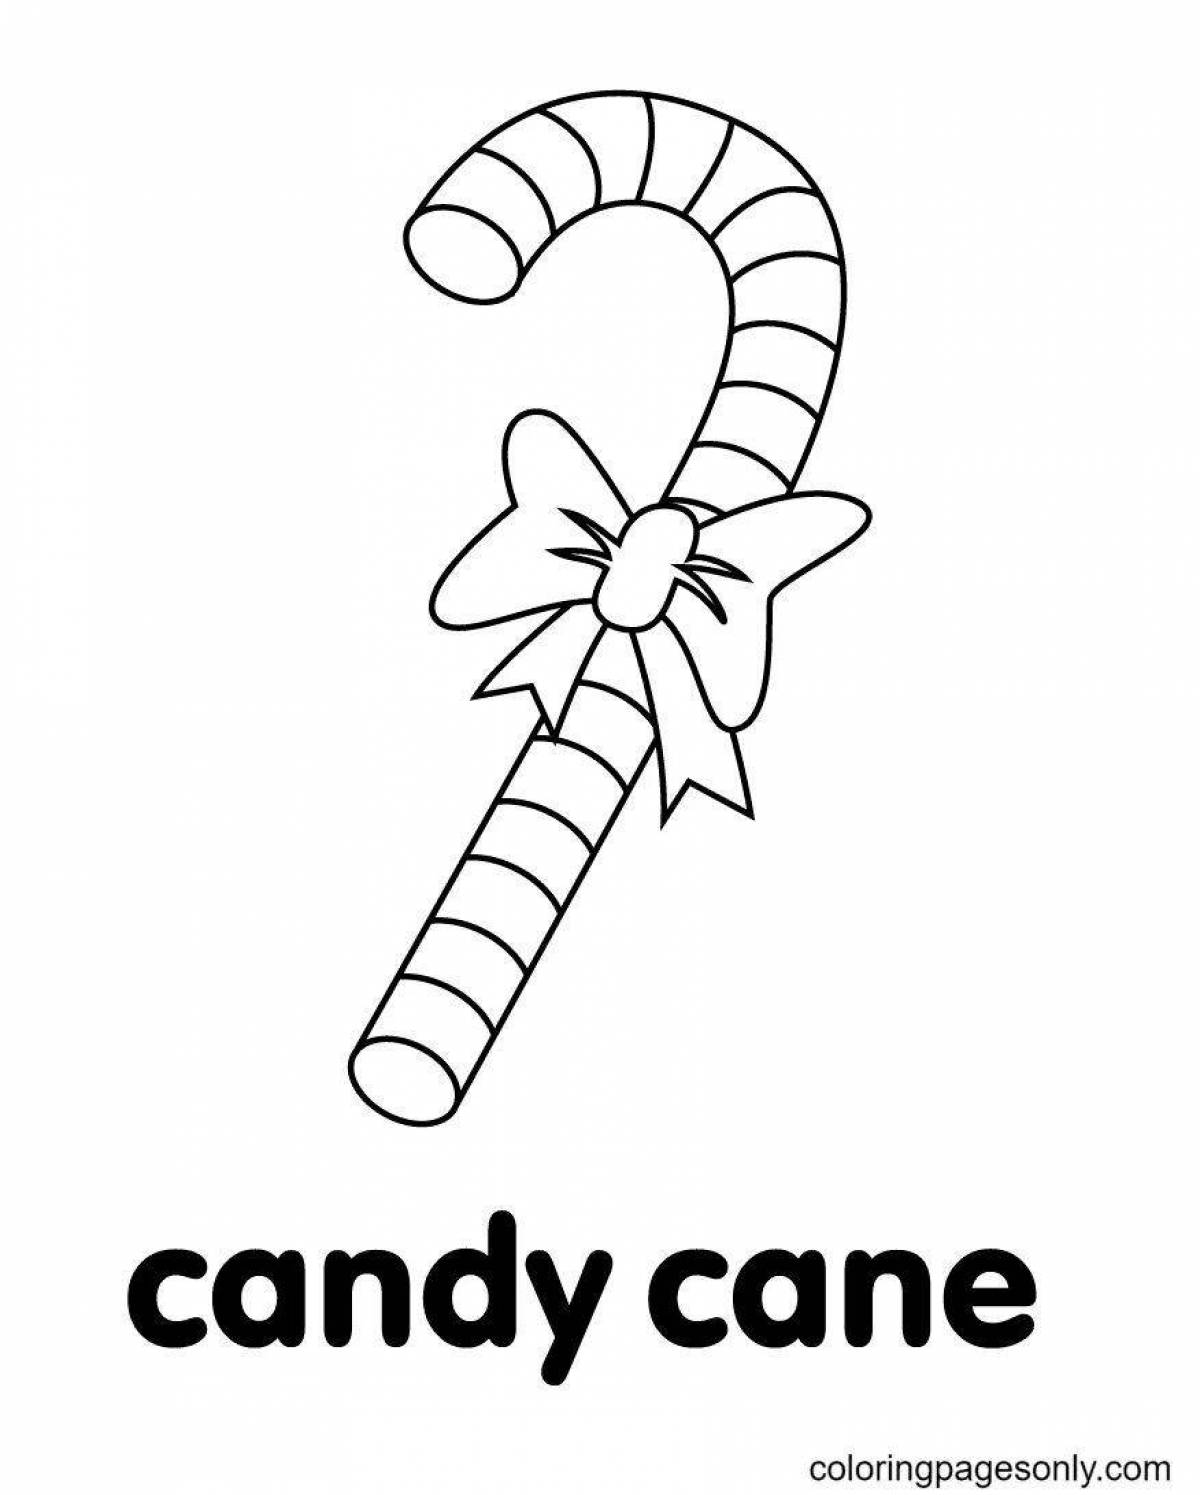 Gorgeous candy cane coloring page